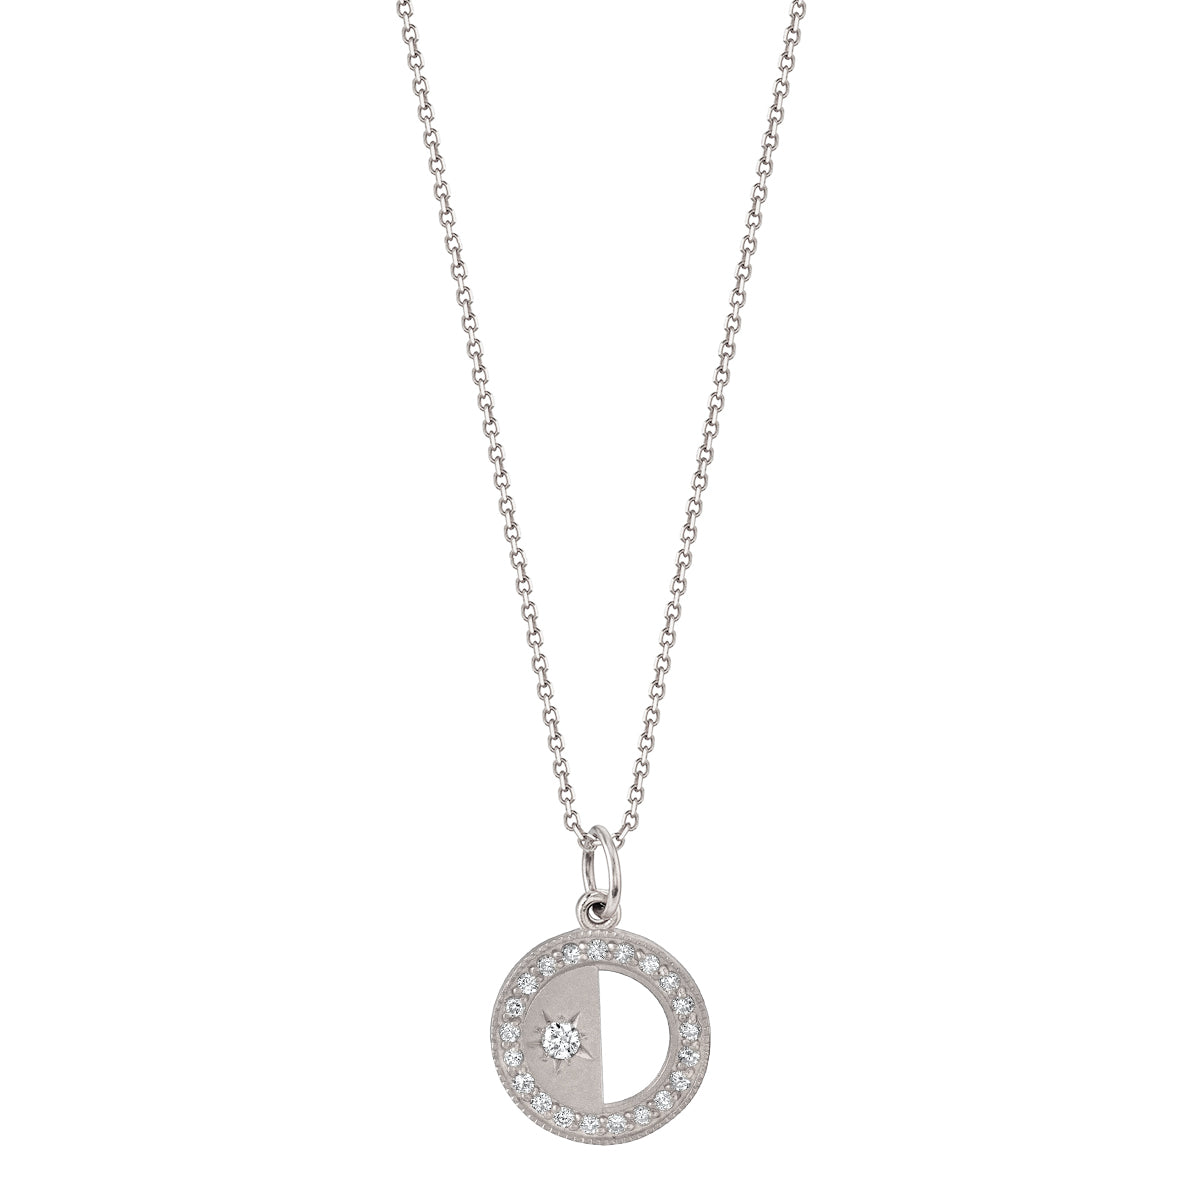 Small First/Last Quarter White Diamond Half Moon Phase Necklace